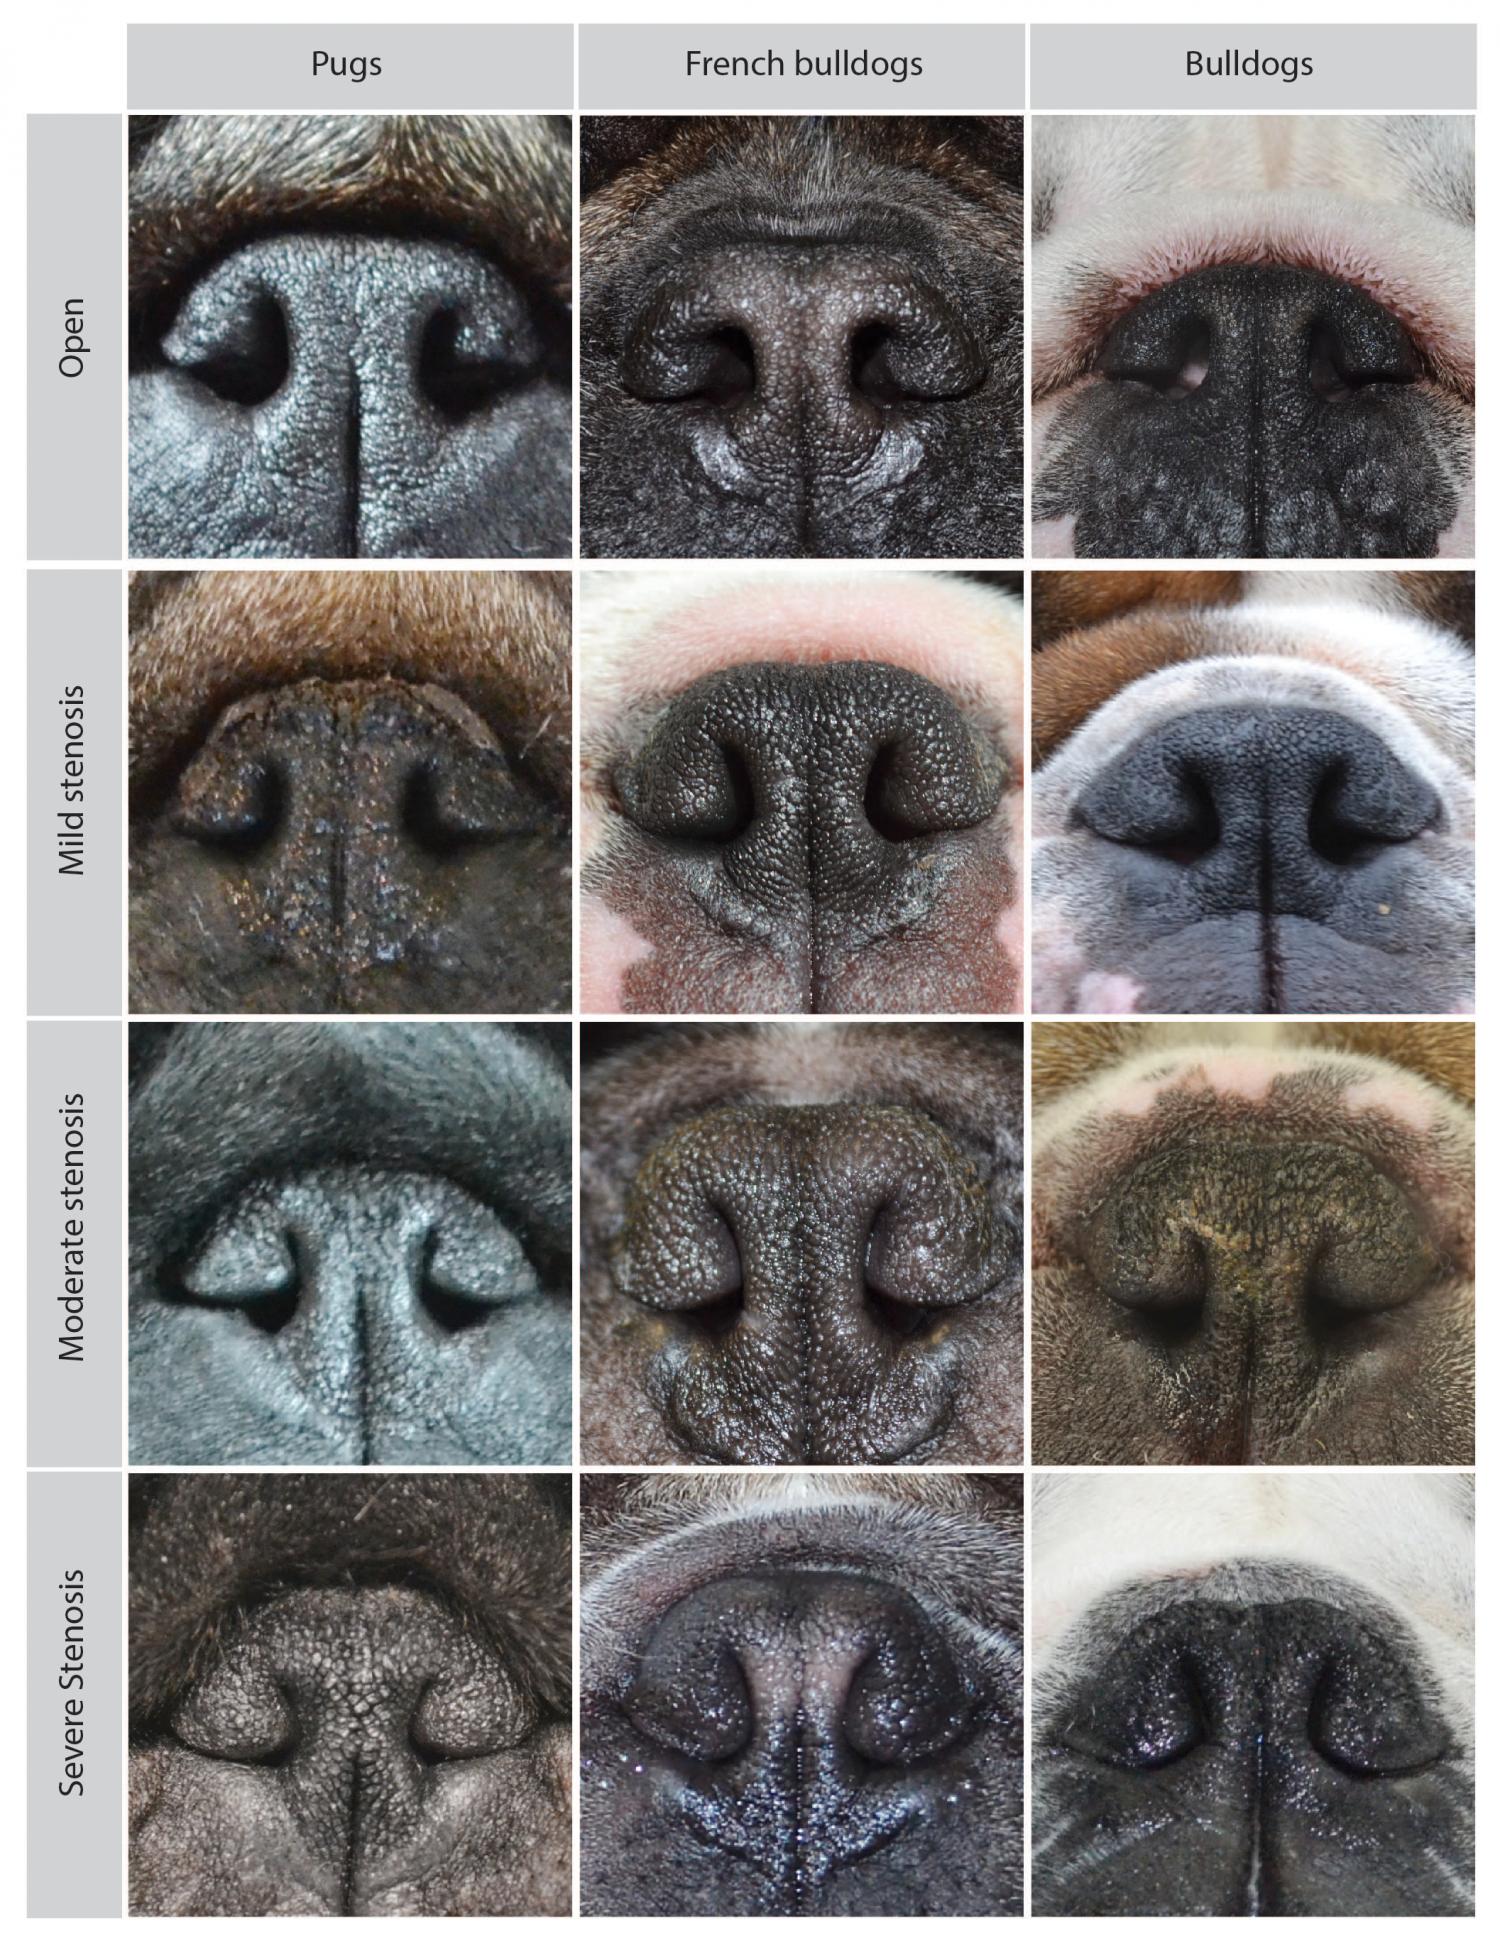 No Simple Way Of Predicting Breathing Difficulties In Pugs French Bulldogs And Bulldogs From External Features